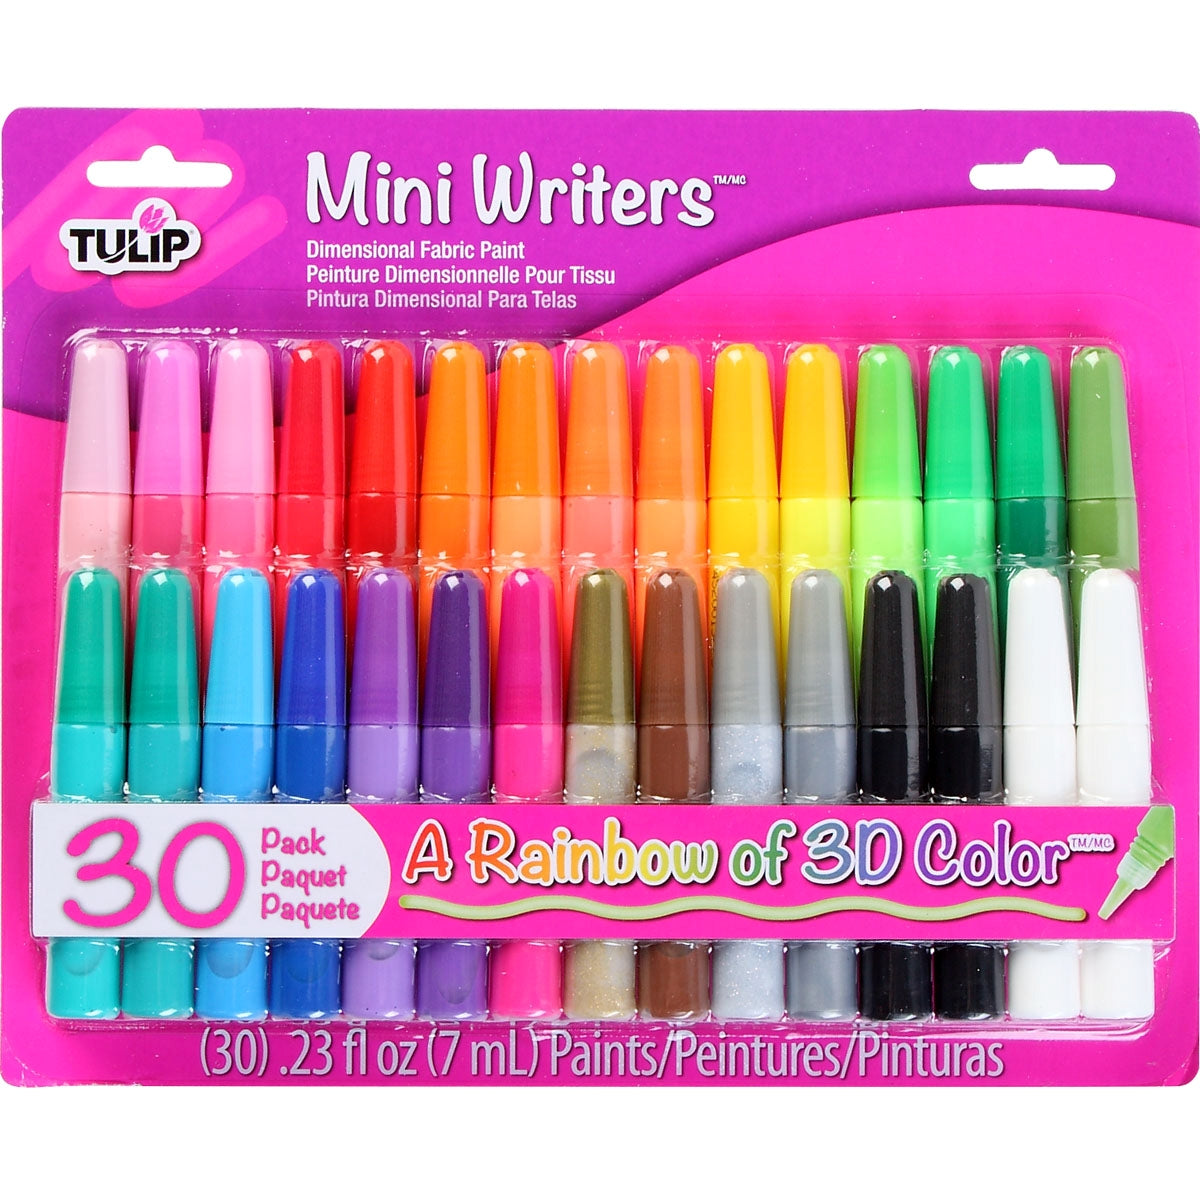 Picture of 32443 Dimensional Fabric Paint Mini Writers 30 Pack